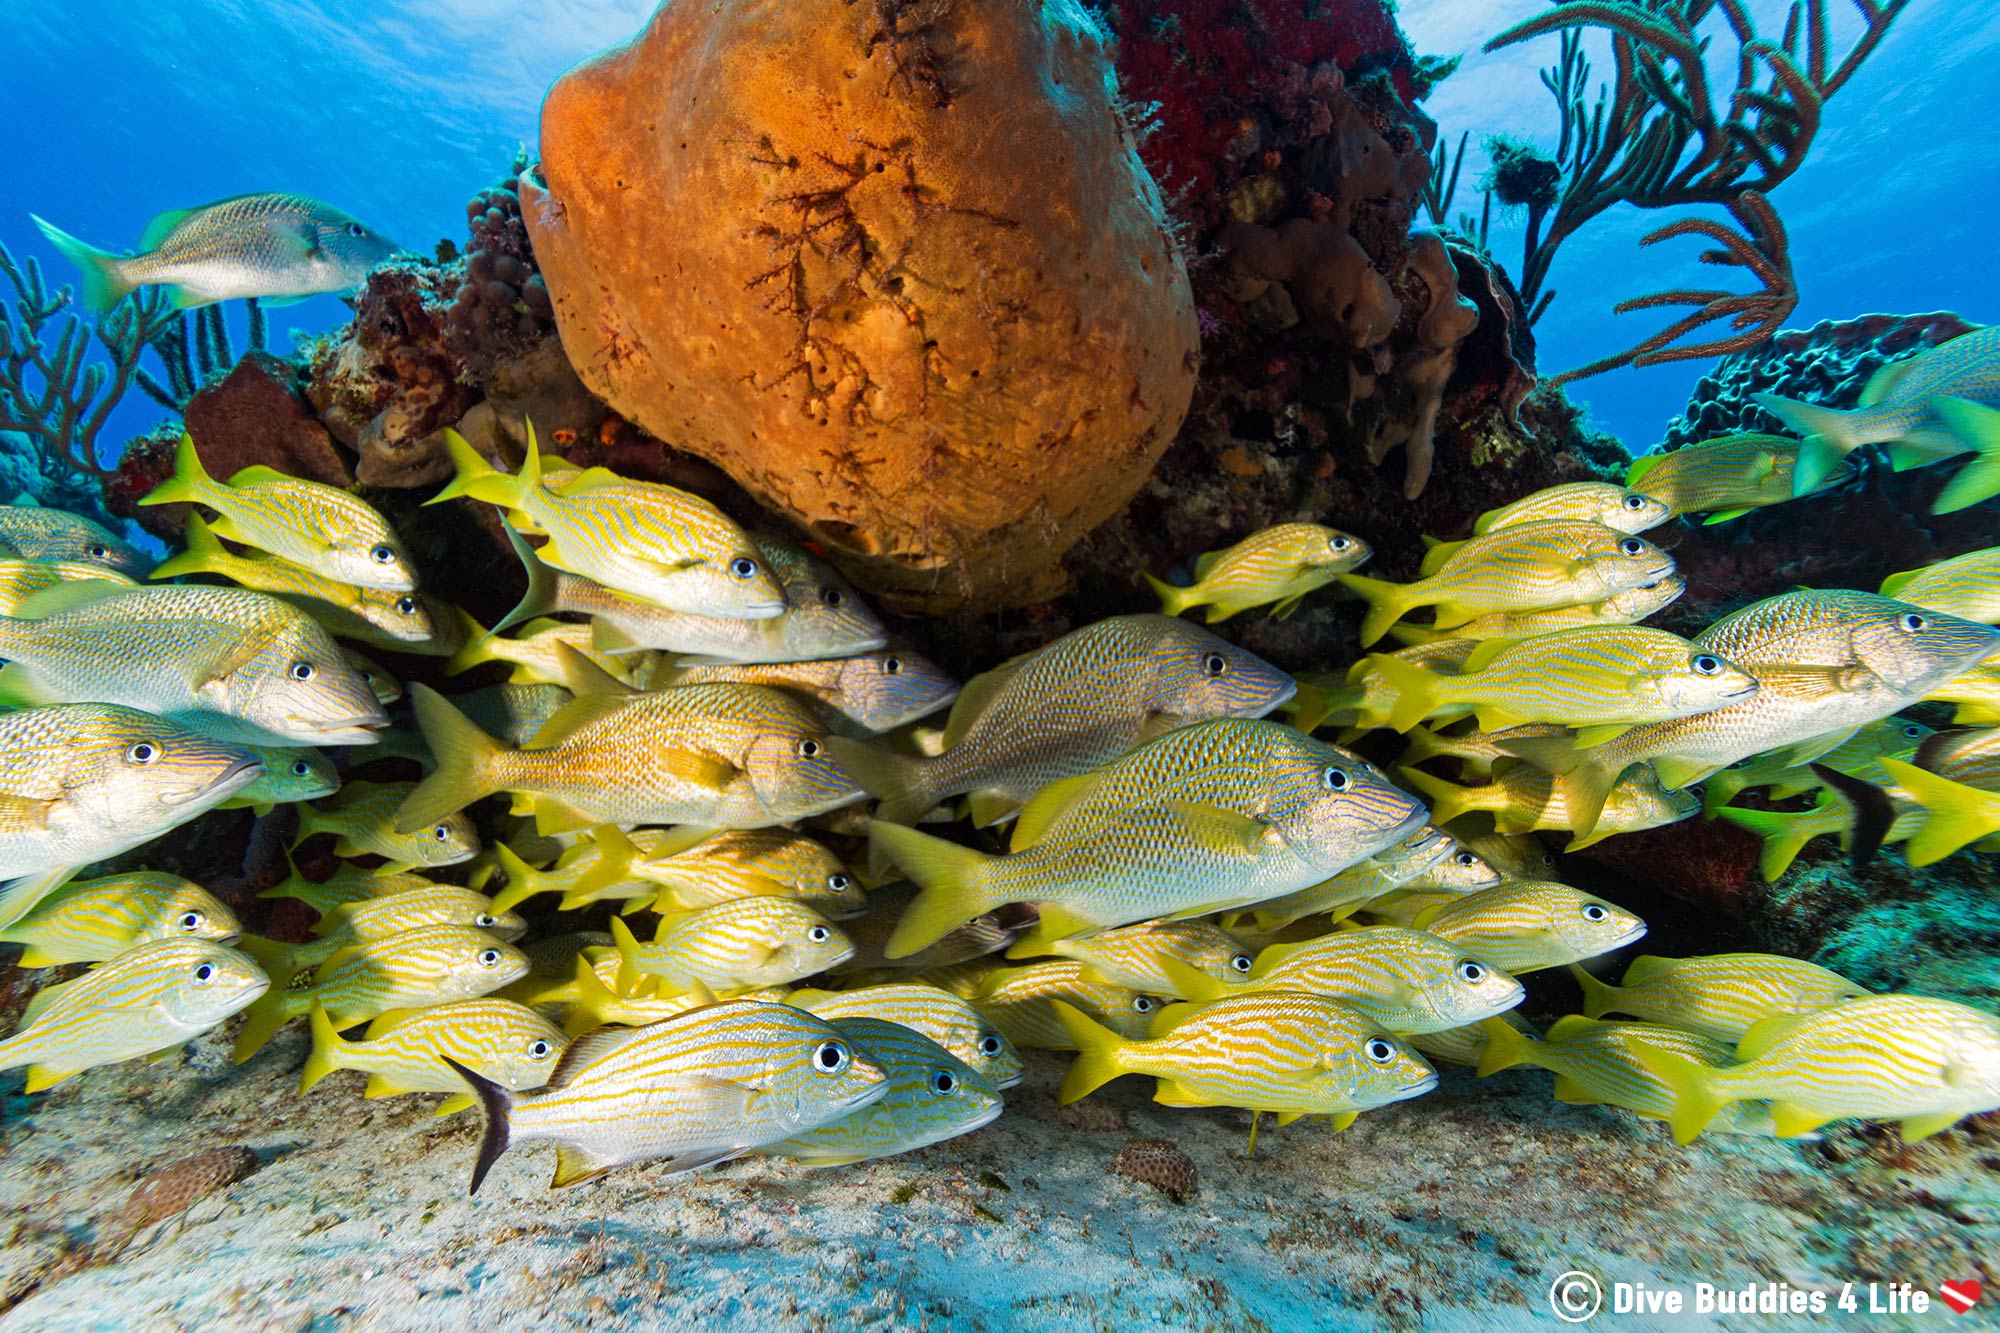 A Reef Ball And A School Of Grunt Fish In Cozumel, Mexico